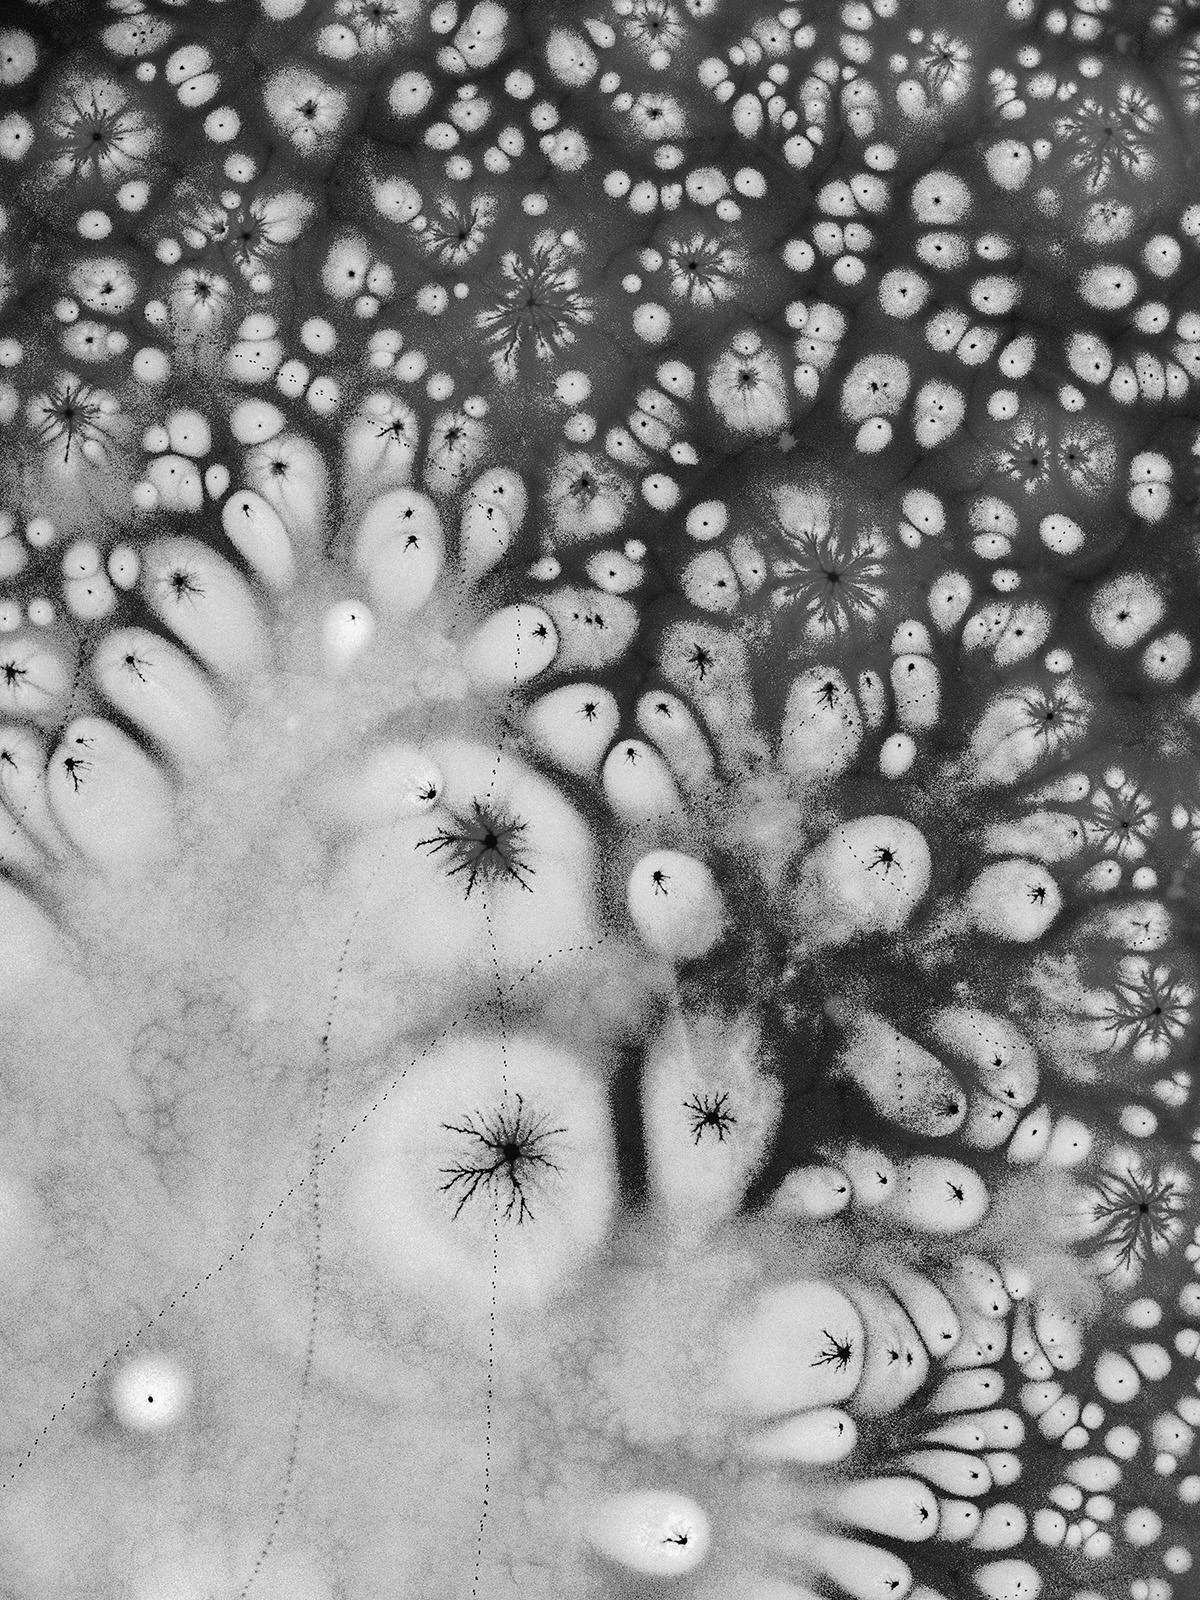 Black and white abstract photograph of a frozen body of water, from the Sony World Photo Awards 2023